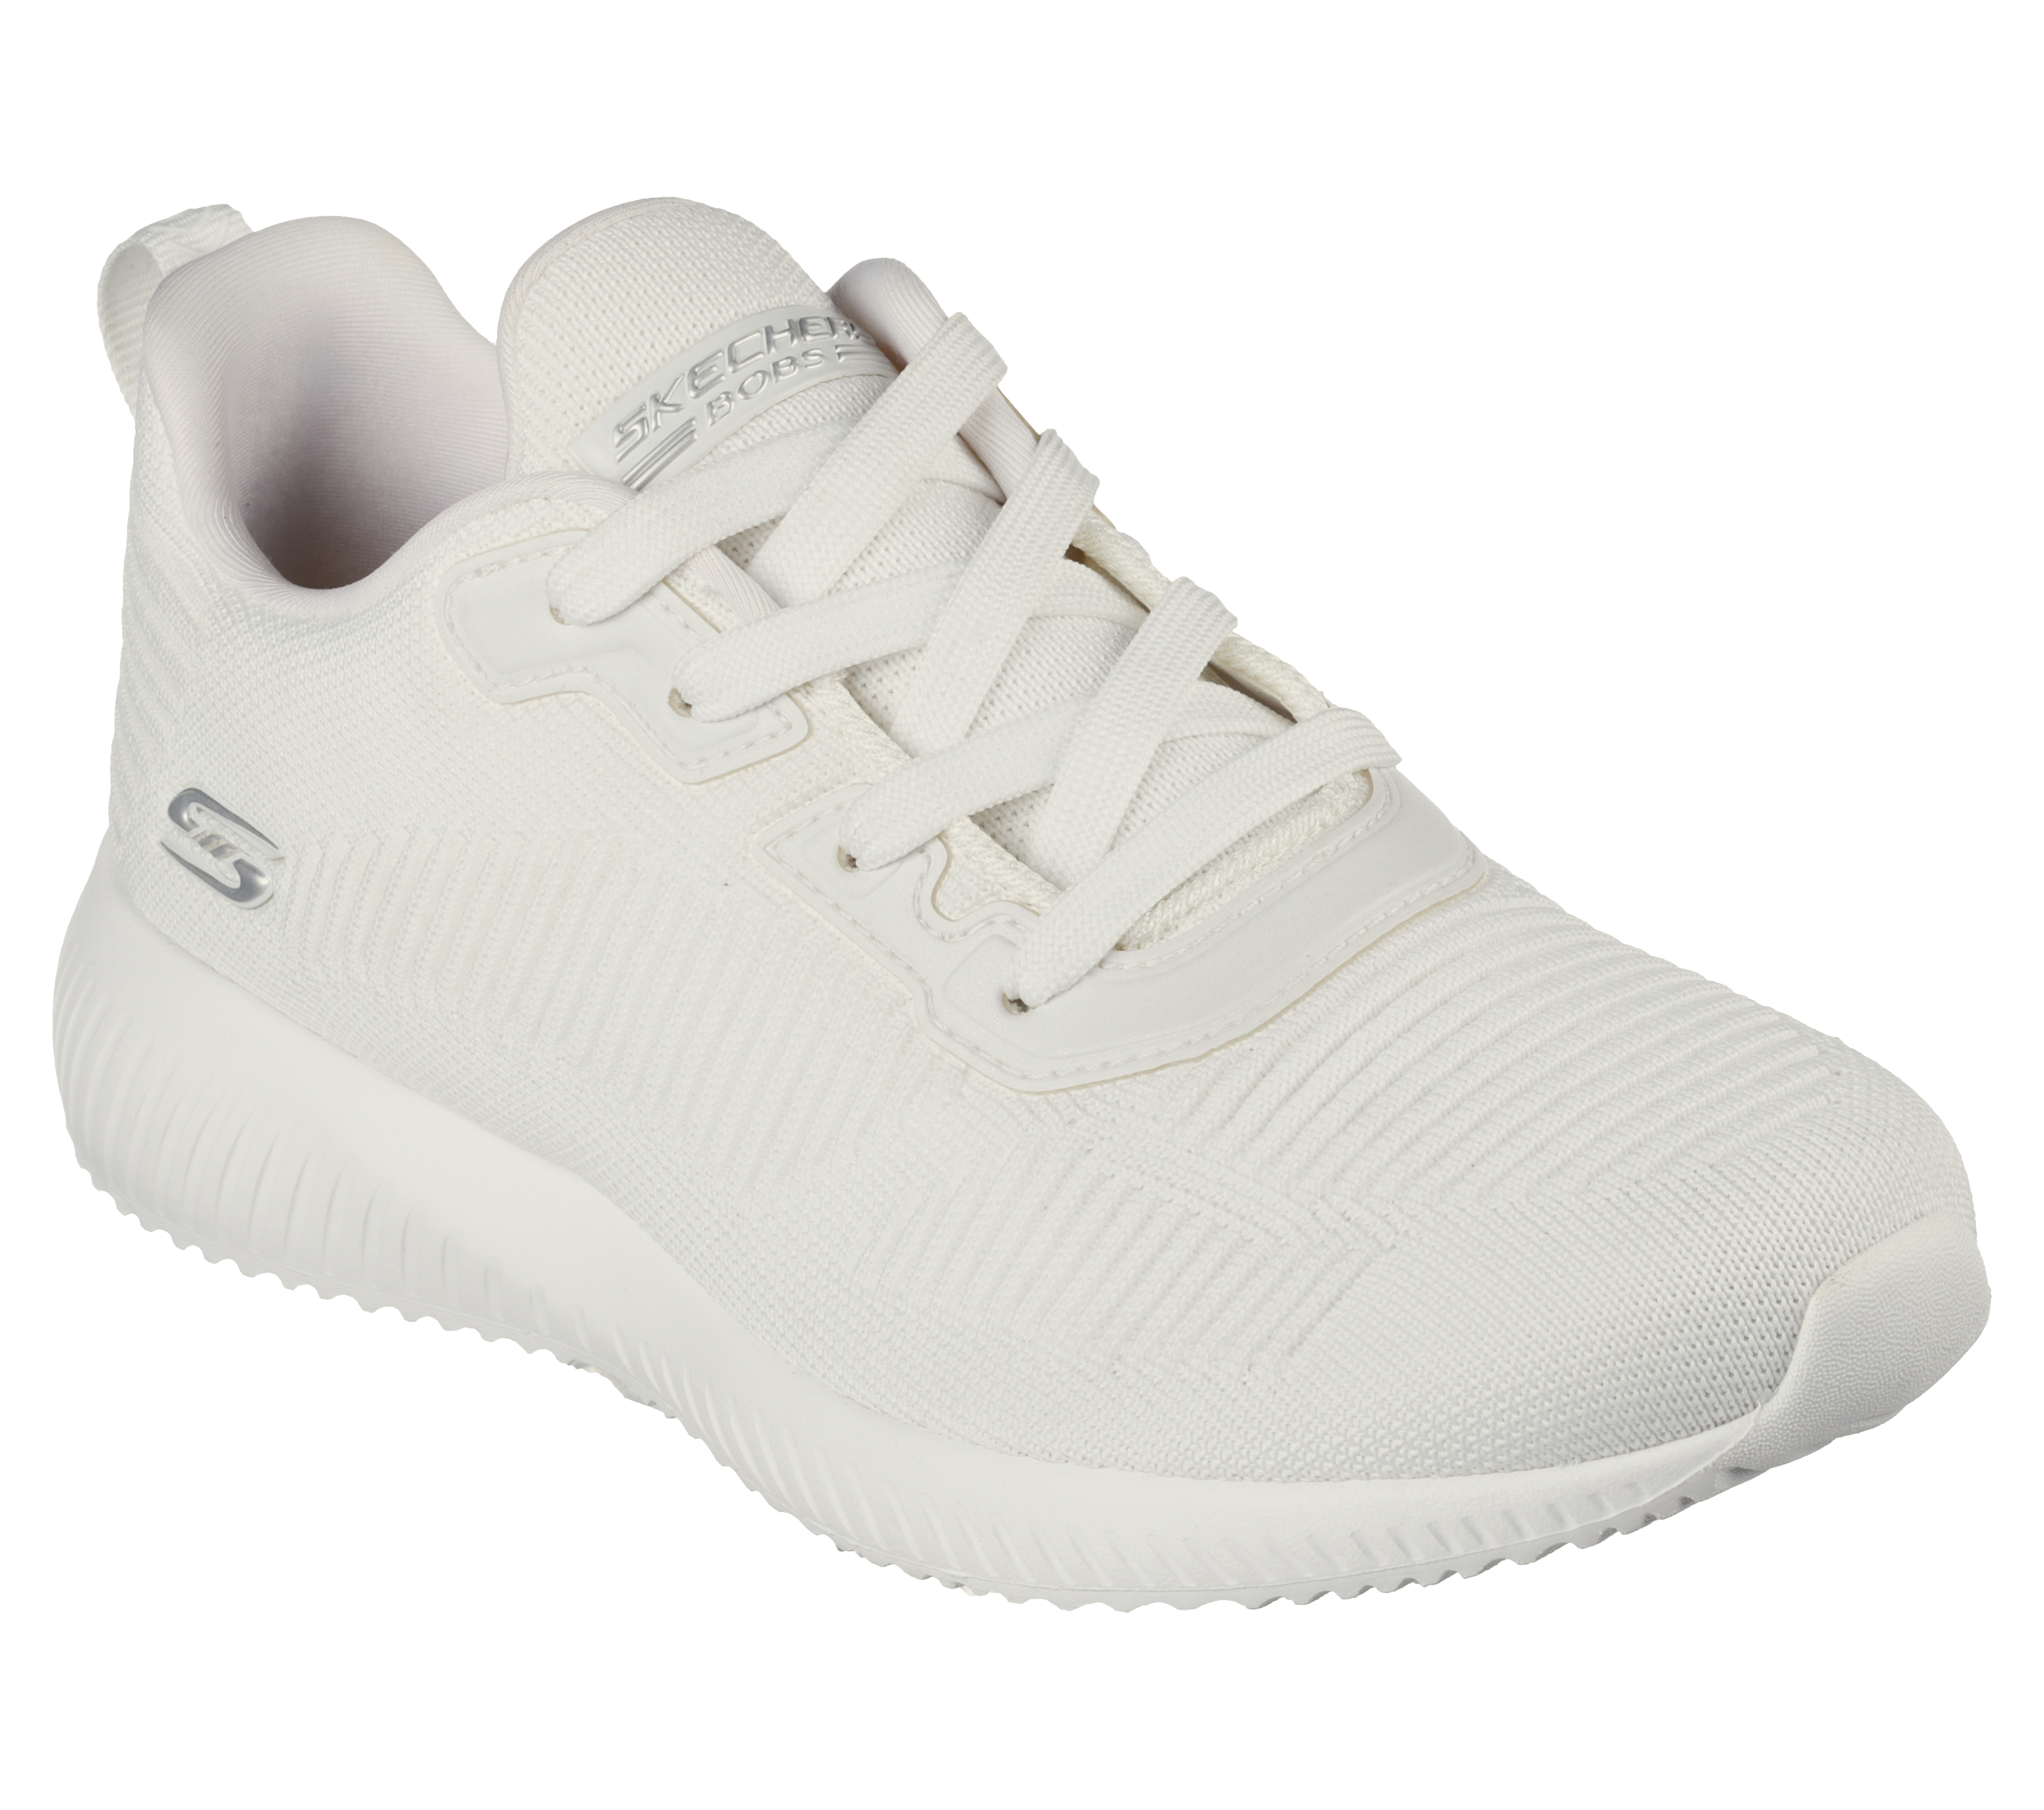 white tennis shoes skechers